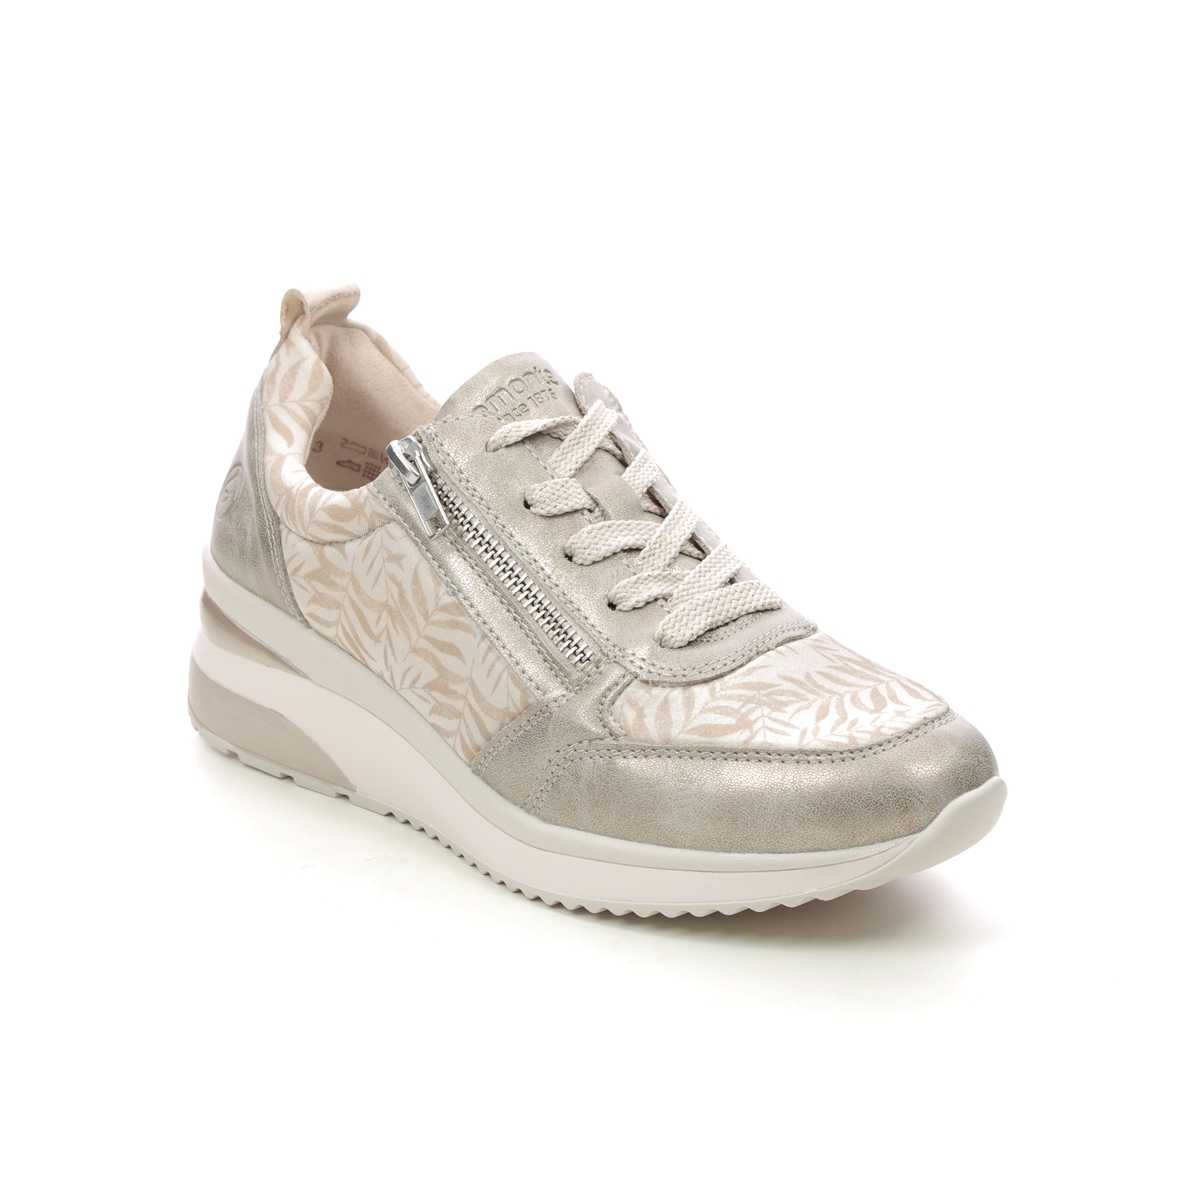 Remonte Rea Zip Wedge Light Gold Womens Trainers D2401-60 In Size 40 In Plain Light Gold